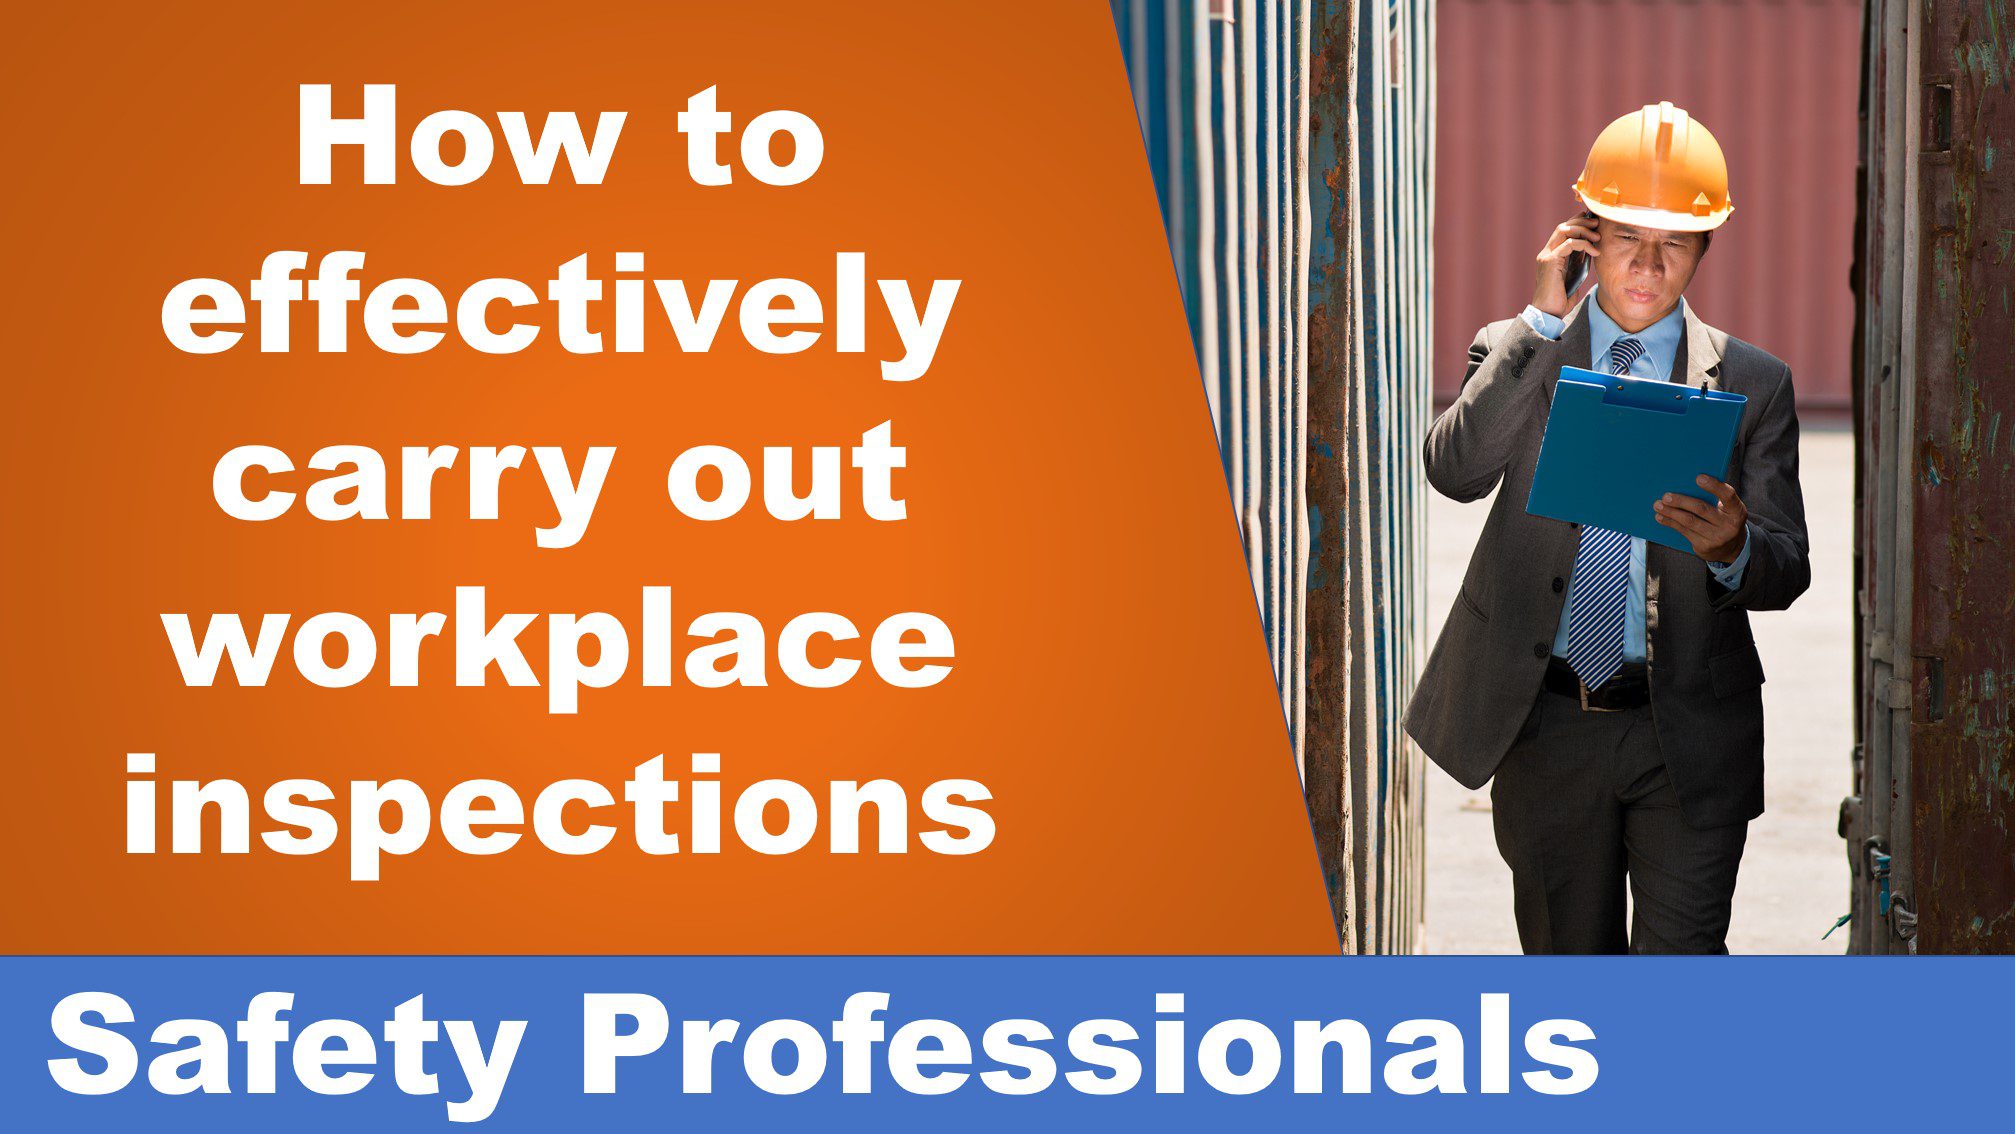 How to effectively carry out workplace inspections